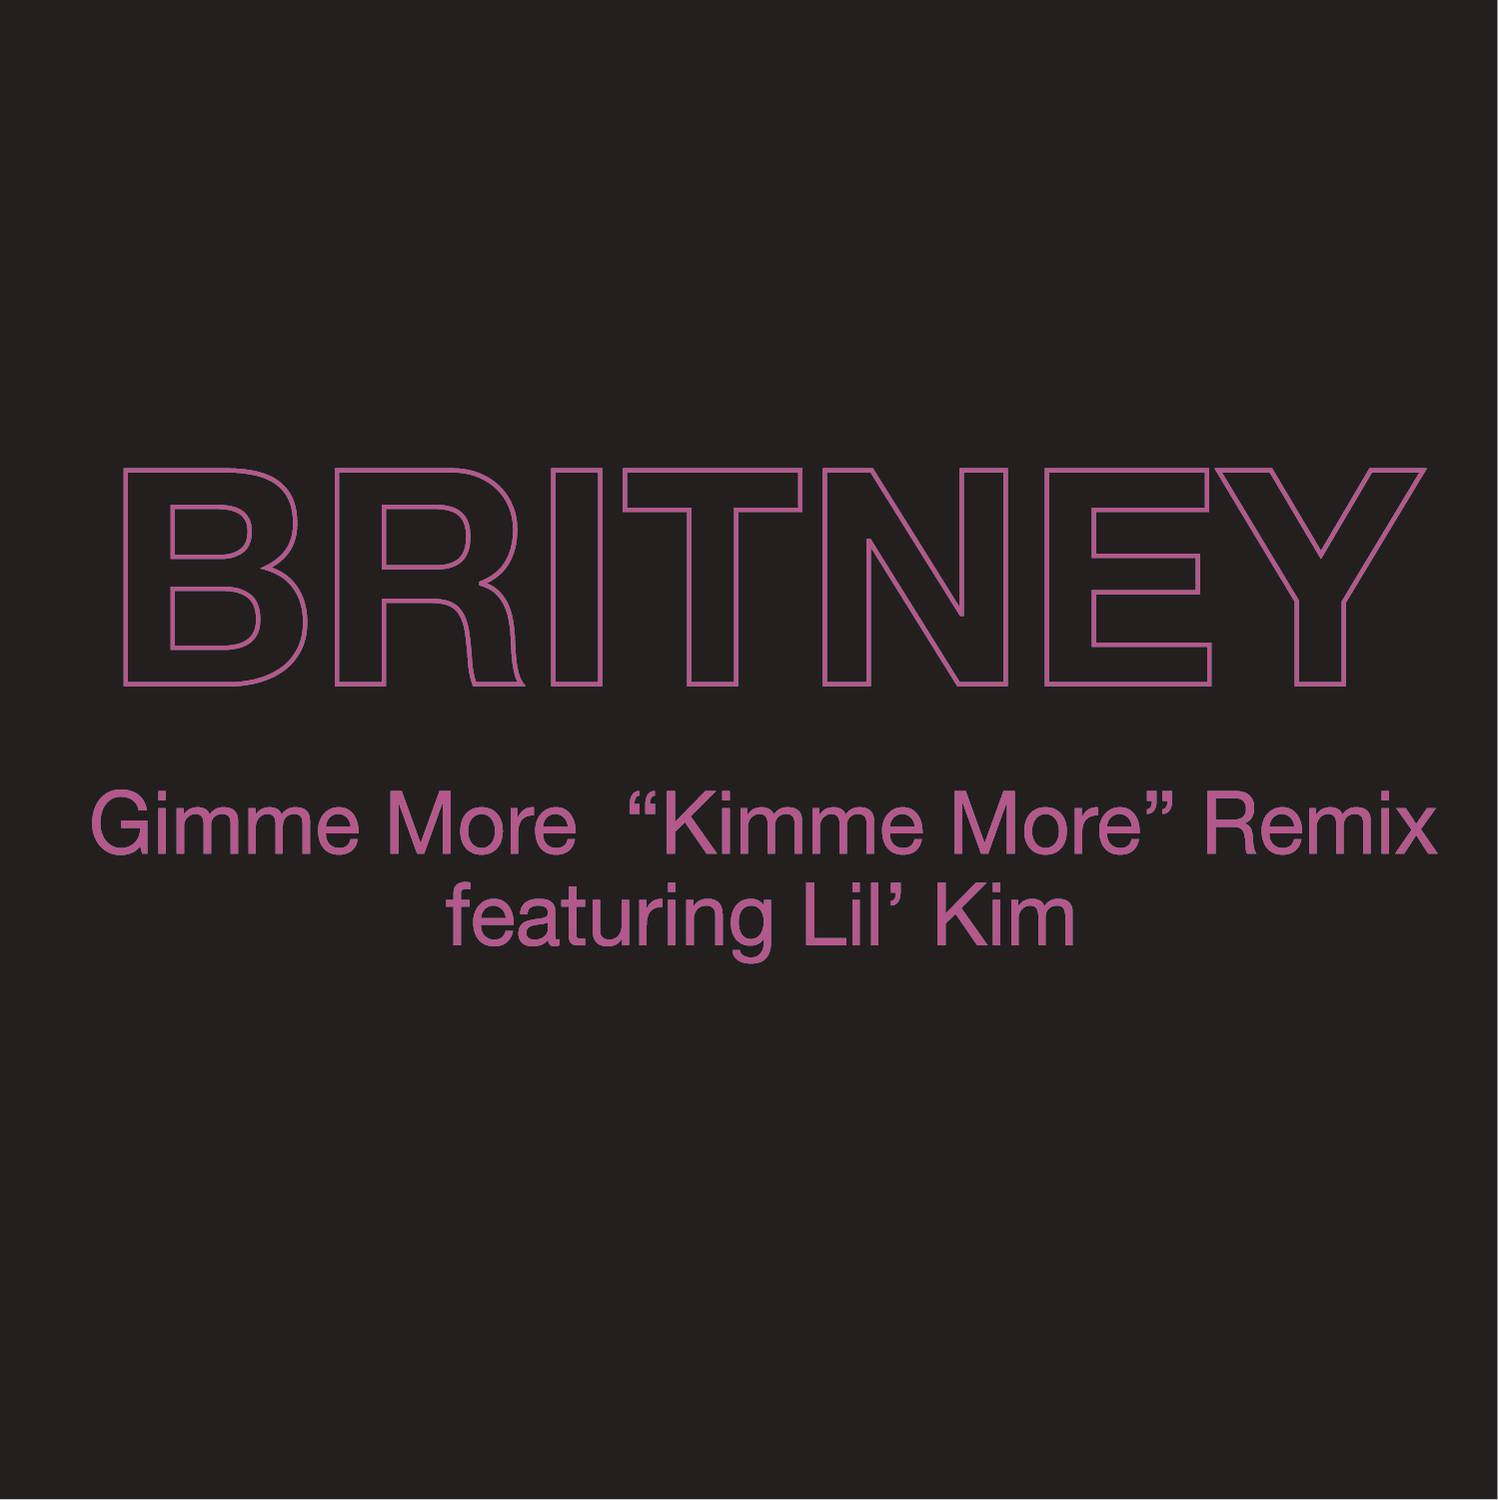 Gimme More ("Kimme More" Remix)